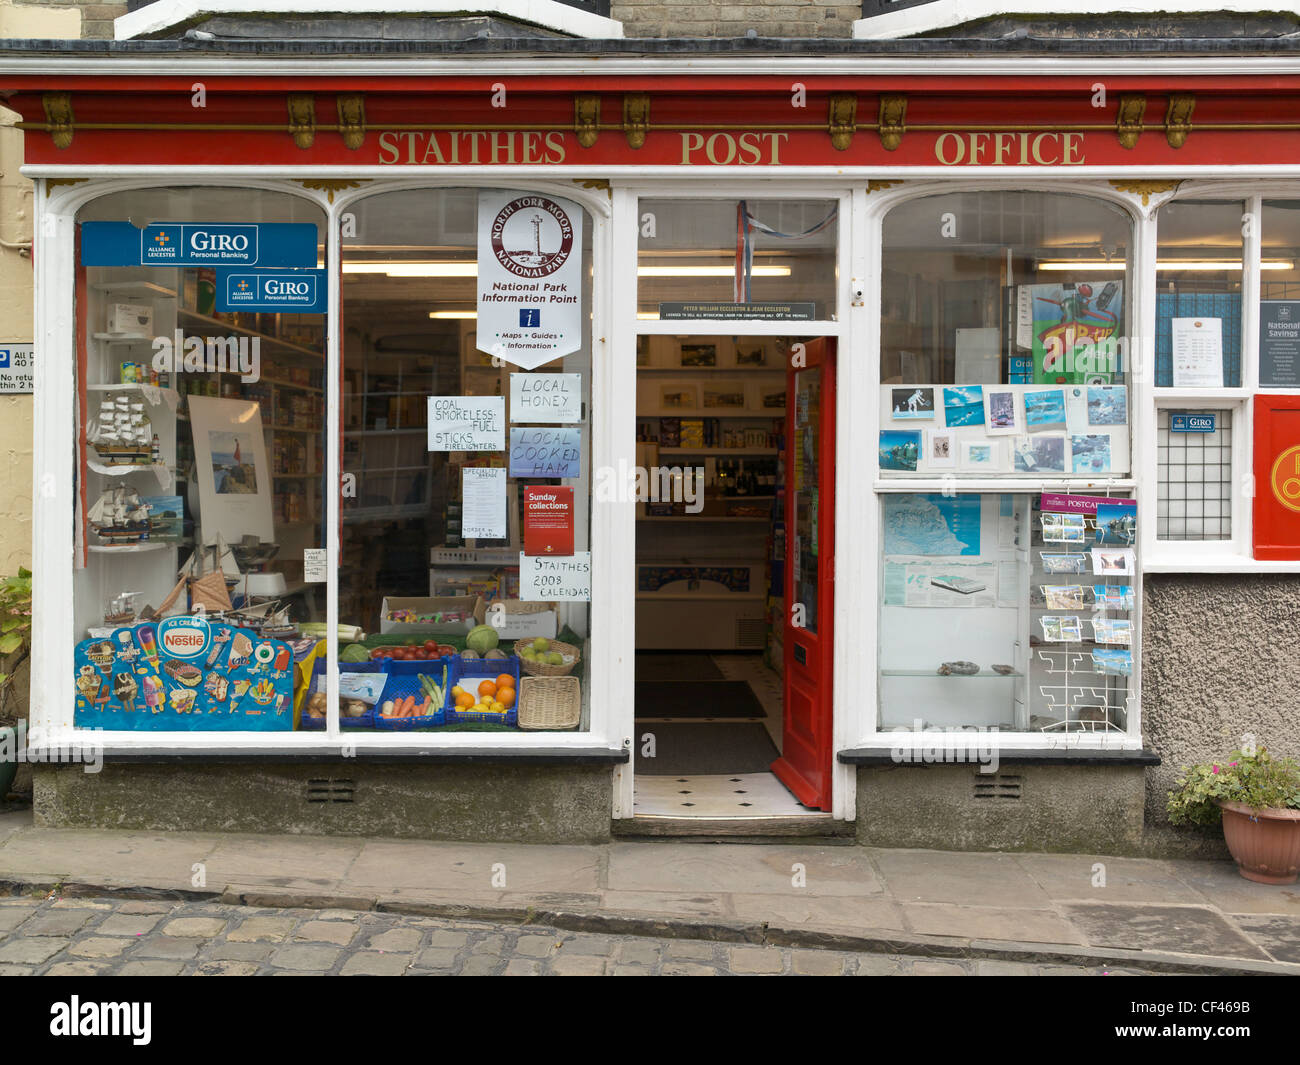 Exterior view of Staithes Post Office. Stock Photo